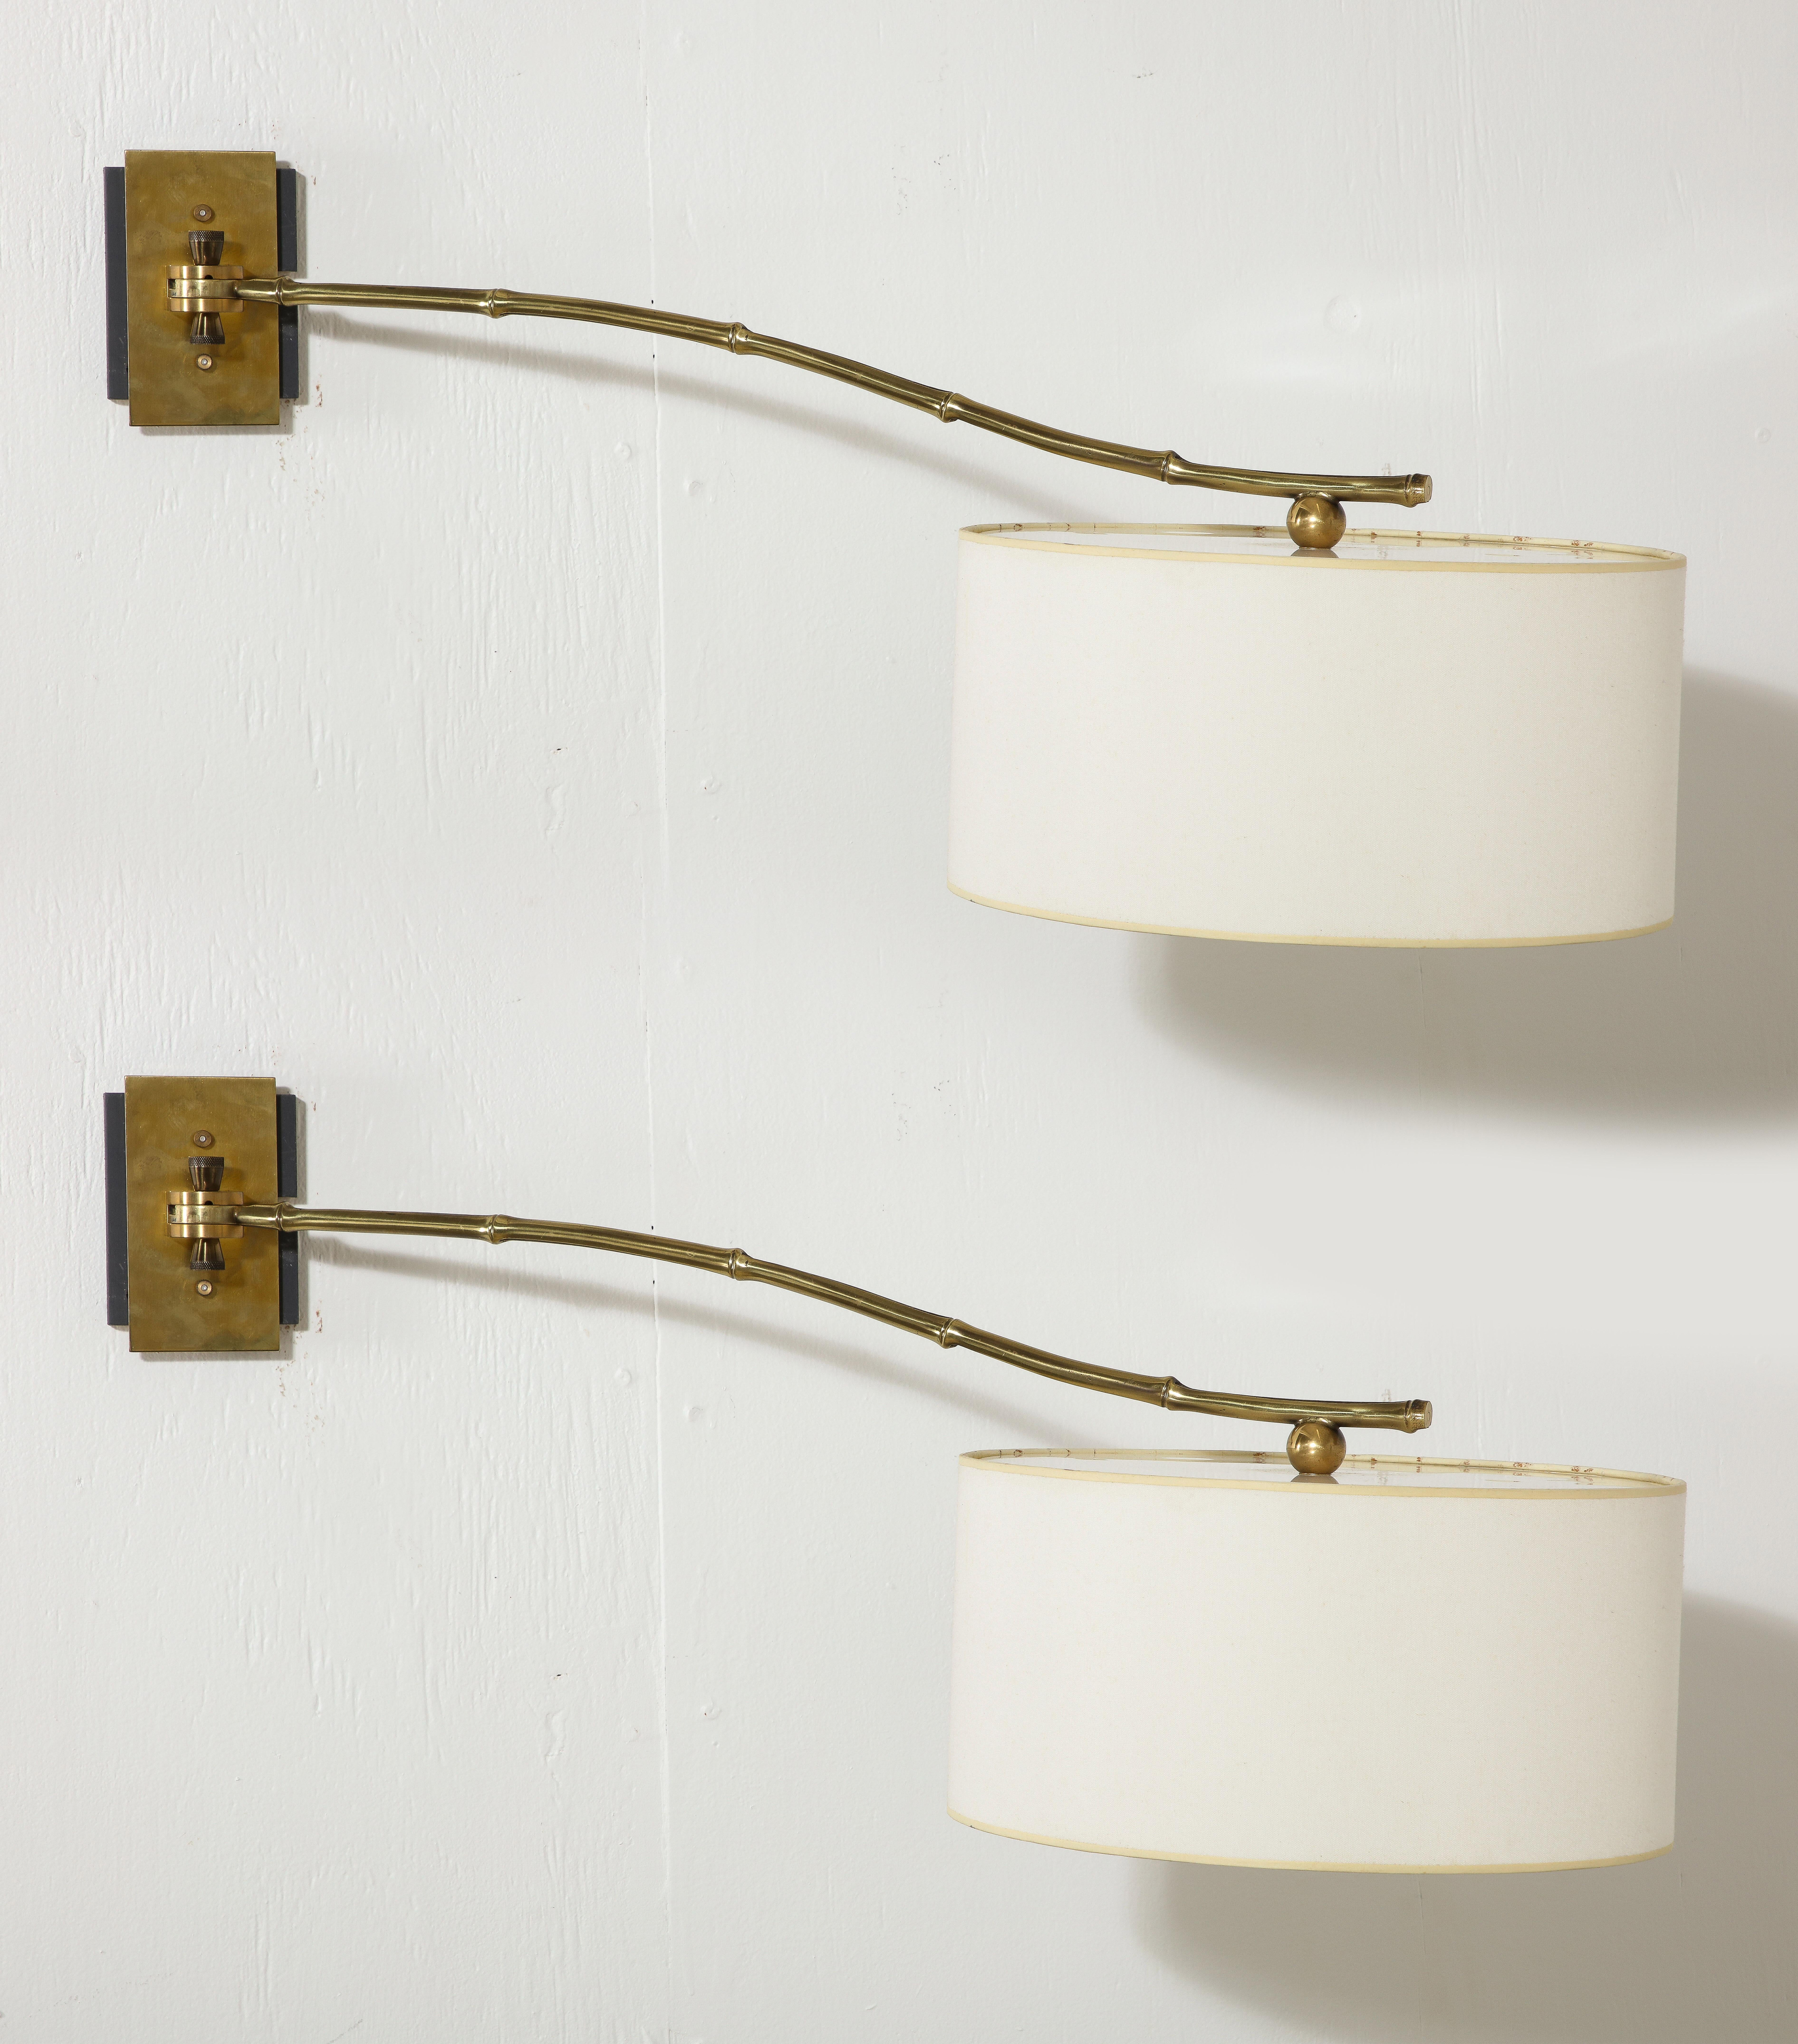 Large Bronze Bagues Bamboo Swing Sconces, France 1950's For Sale 11